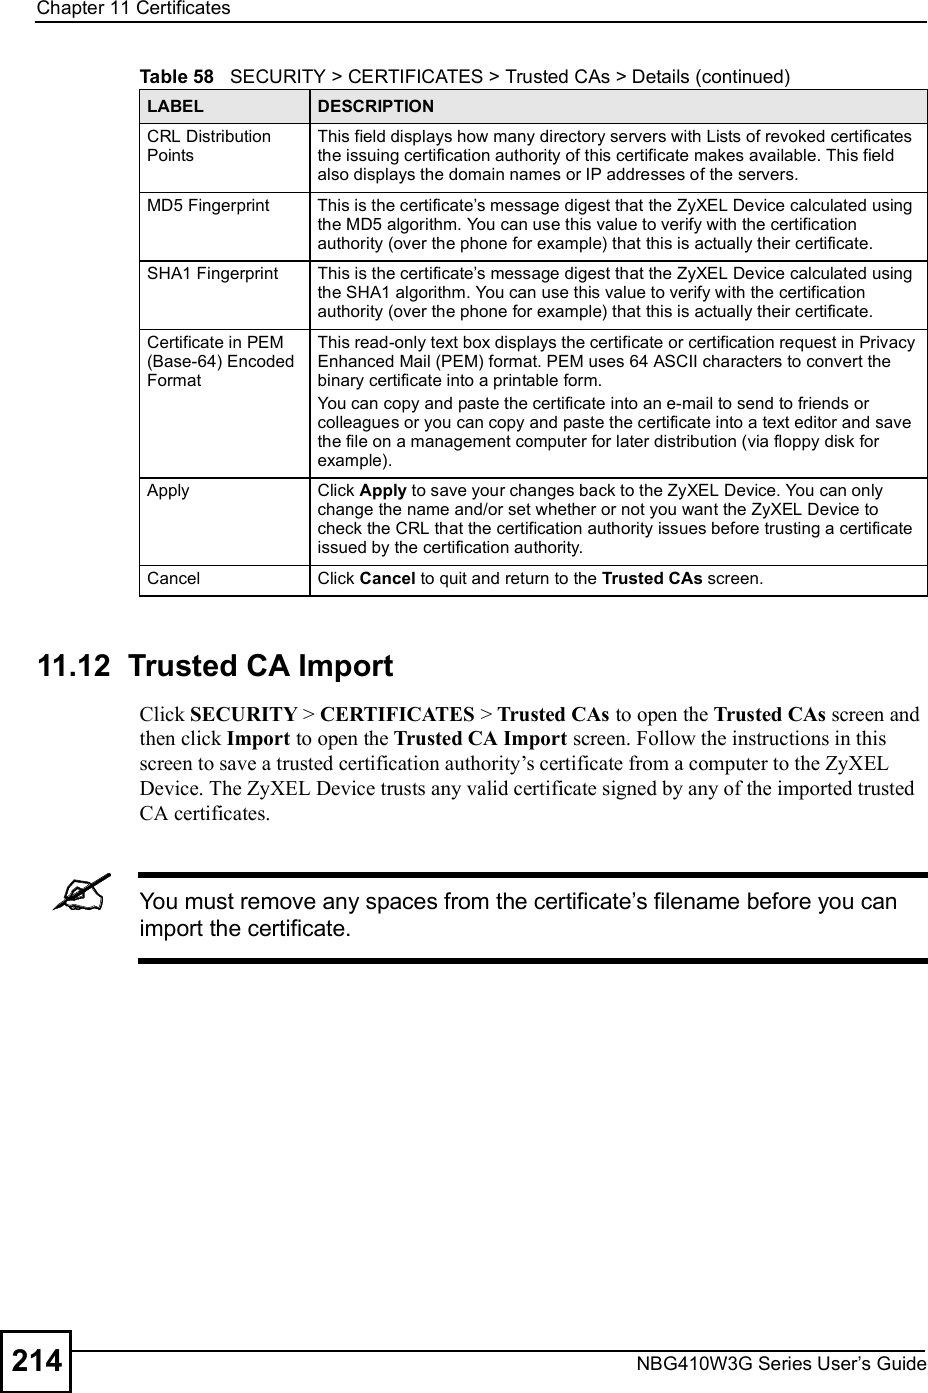 Chapter 11CertificatesNBG410W3G Series User s Guide21411.12  Trusted CA Import   Click SECURITY &gt; CERTIFICATES &gt; Trusted CAs to open the Trusted CAs screen and then click Import to open the Trusted CA Import screen. Follow the instructions in this screen to save a trusted certification authority!s certificate from a computer to the ZyXEL Device. The ZyXEL Device trusts any valid certificate signed by any of the imported trusted CA certificates.You must remove any spaces from the certificate s filename before you can import the certificate.CRL Distribution PointsThis field displays how many directory servers with Lists of revoked certificates the issuing certification authority of this certificate makes available. This field also displays the domain names or IP addresses of the servers.MD5 FingerprintThis is the certificate s message digest that the ZyXEL Device calculated using the MD5 algorithm. You can use this value to verify with the certification authority (over the phone for example) that this is actually their certificate. SHA1 FingerprintThis is the certificate s message digest that the ZyXEL Device calculated using the SHA1 algorithm. You can use this value to verify with the certification authority (over the phone for example) that this is actually their certificate.Certificate in PEM (Base-64) Encoded FormatThis read-only text box displays the certificate or certification request in Privacy Enhanced Mail (PEM) format. PEM uses 64 ASCII characters to convert the binary certificate into a printable form. You can copy and paste the certificate into an e-mail to send to friends or colleagues or you can copy and paste the certificate into a text editor and save the file on a management computer for later distribution (via floppy disk for example).ApplyClick Apply to save your changes back to the ZyXEL Device. You can only change the name and/or set whether or not you want the ZyXEL Device to check the CRL that the certification authority issues before trusting a certificate issued by the certification authority.CancelClick Cancel to quit and return to the Trusted CAs screen.Table 58   SECURITY &gt; CERTIFICATES &gt; Trusted CAs &gt; Details (continued)LABEL DESCRIPTION